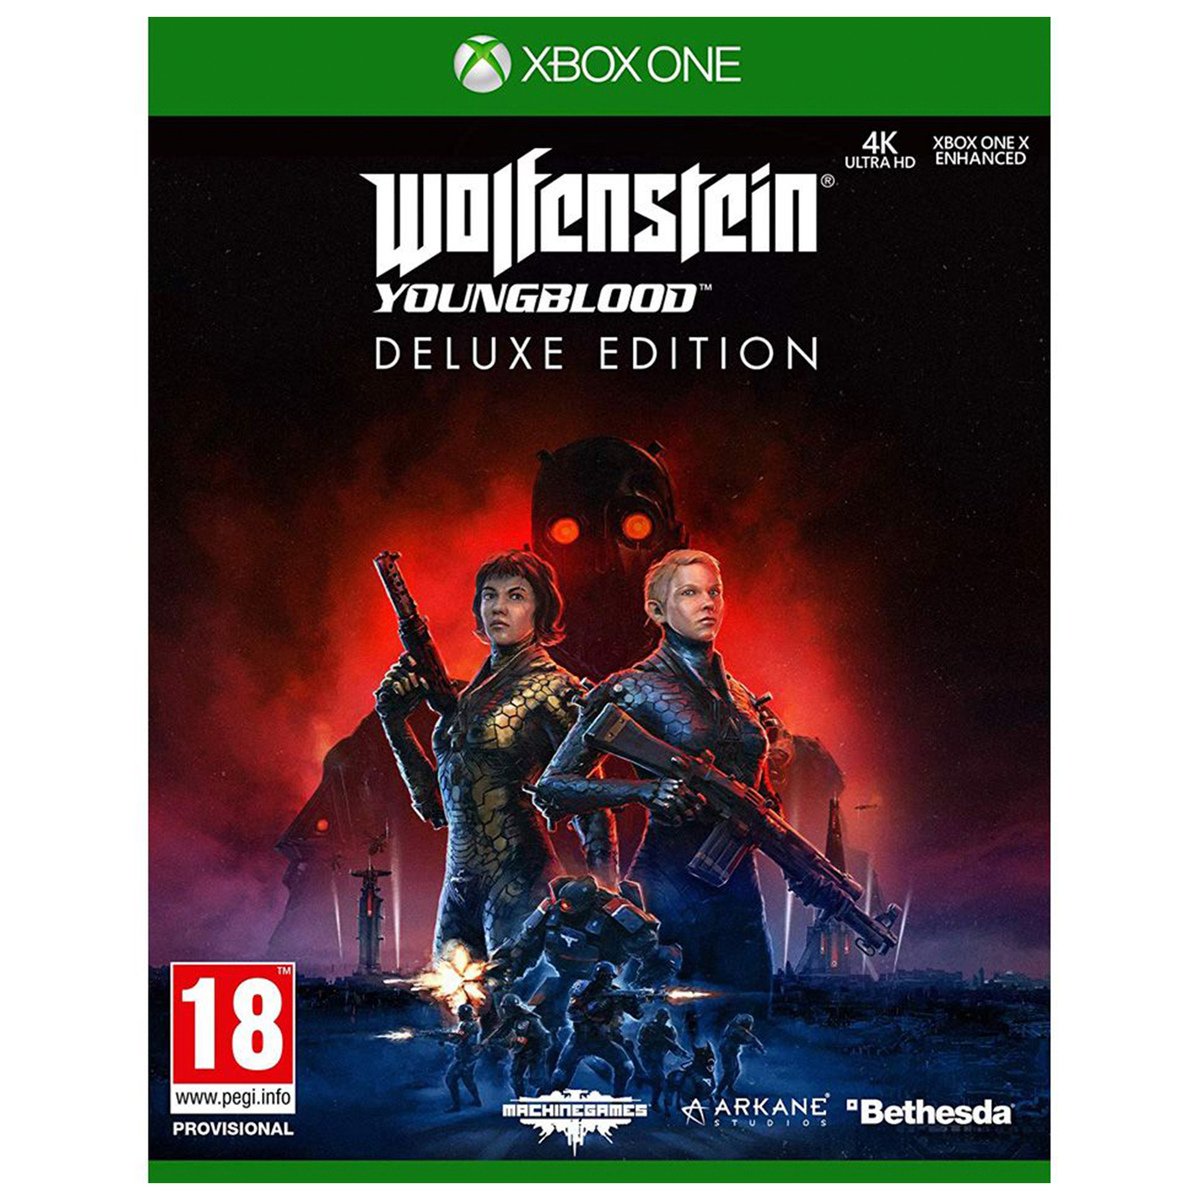 Wolfenstein Youngblood - Deluxe Edition Xbox One